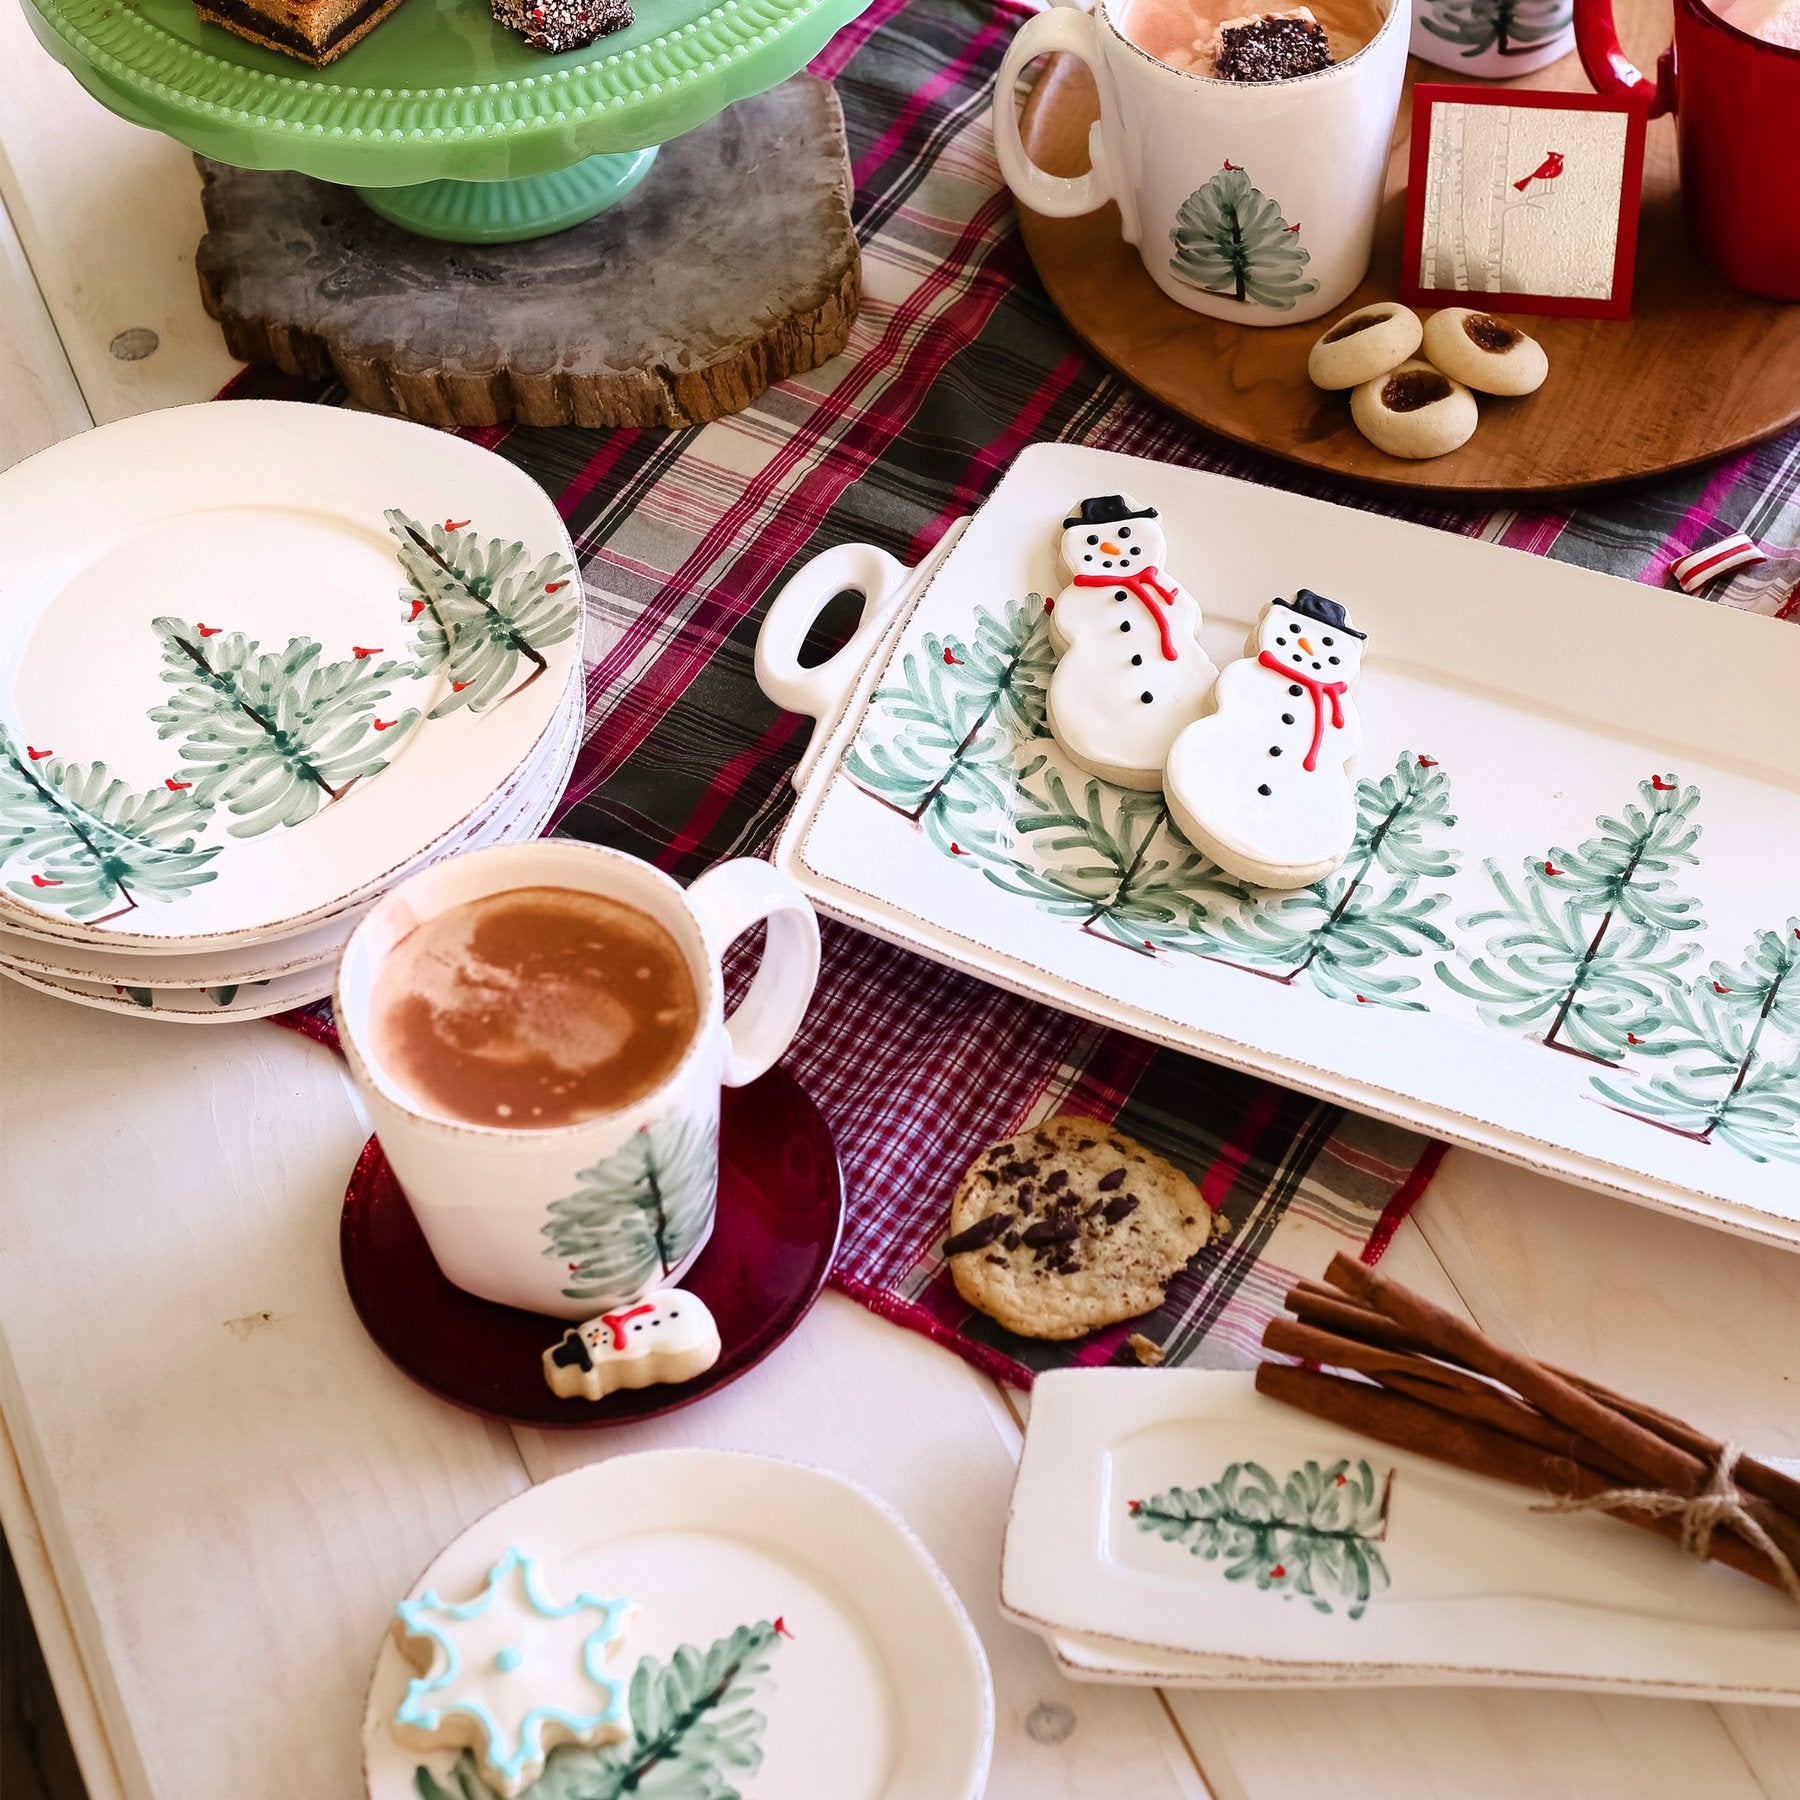 holiday platters, plates, and mugs arranged on a wooden table with snowman cookies, hot cocoa, and cinnamon sticks.